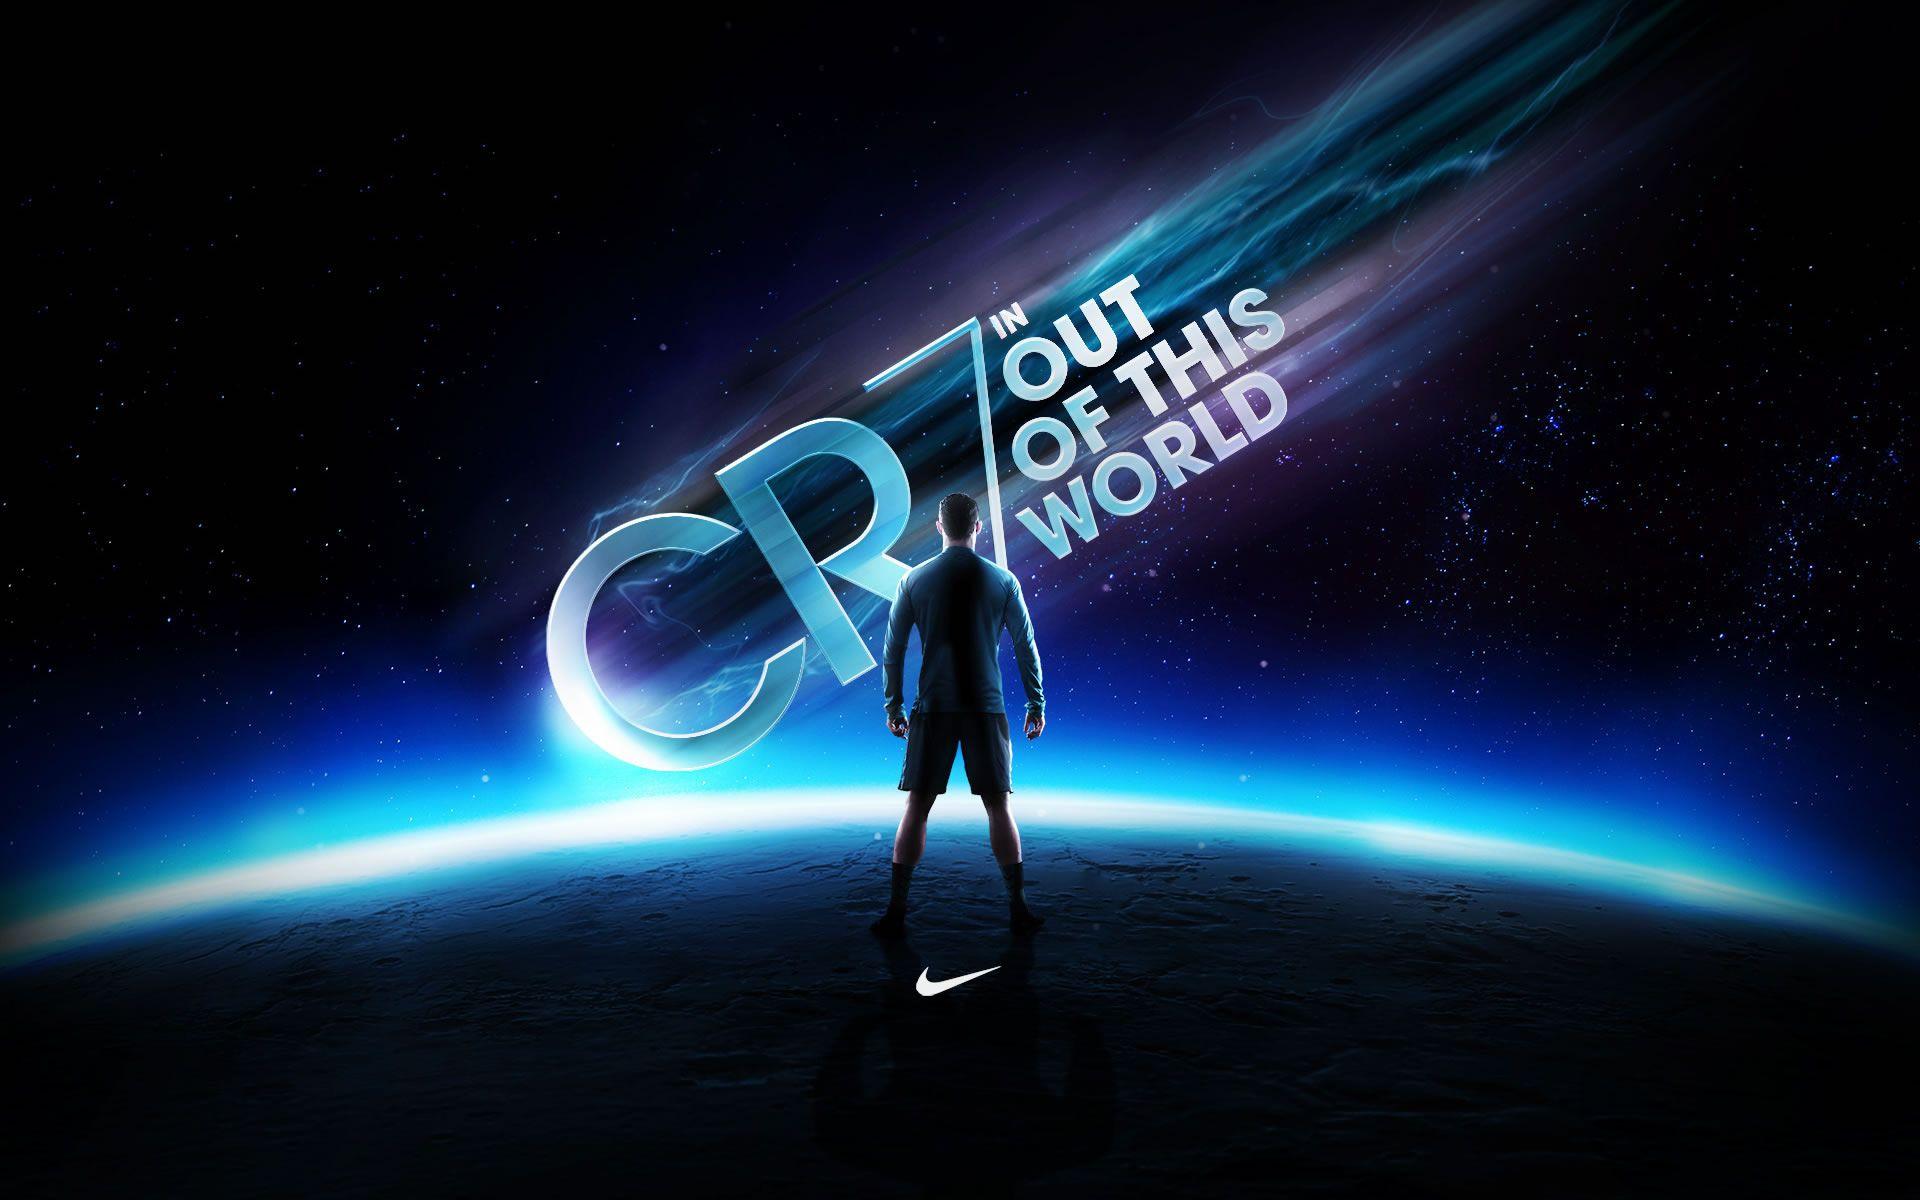 CR7: "Out of this world" Nike Wallpaper Ronaldo Wallpaper